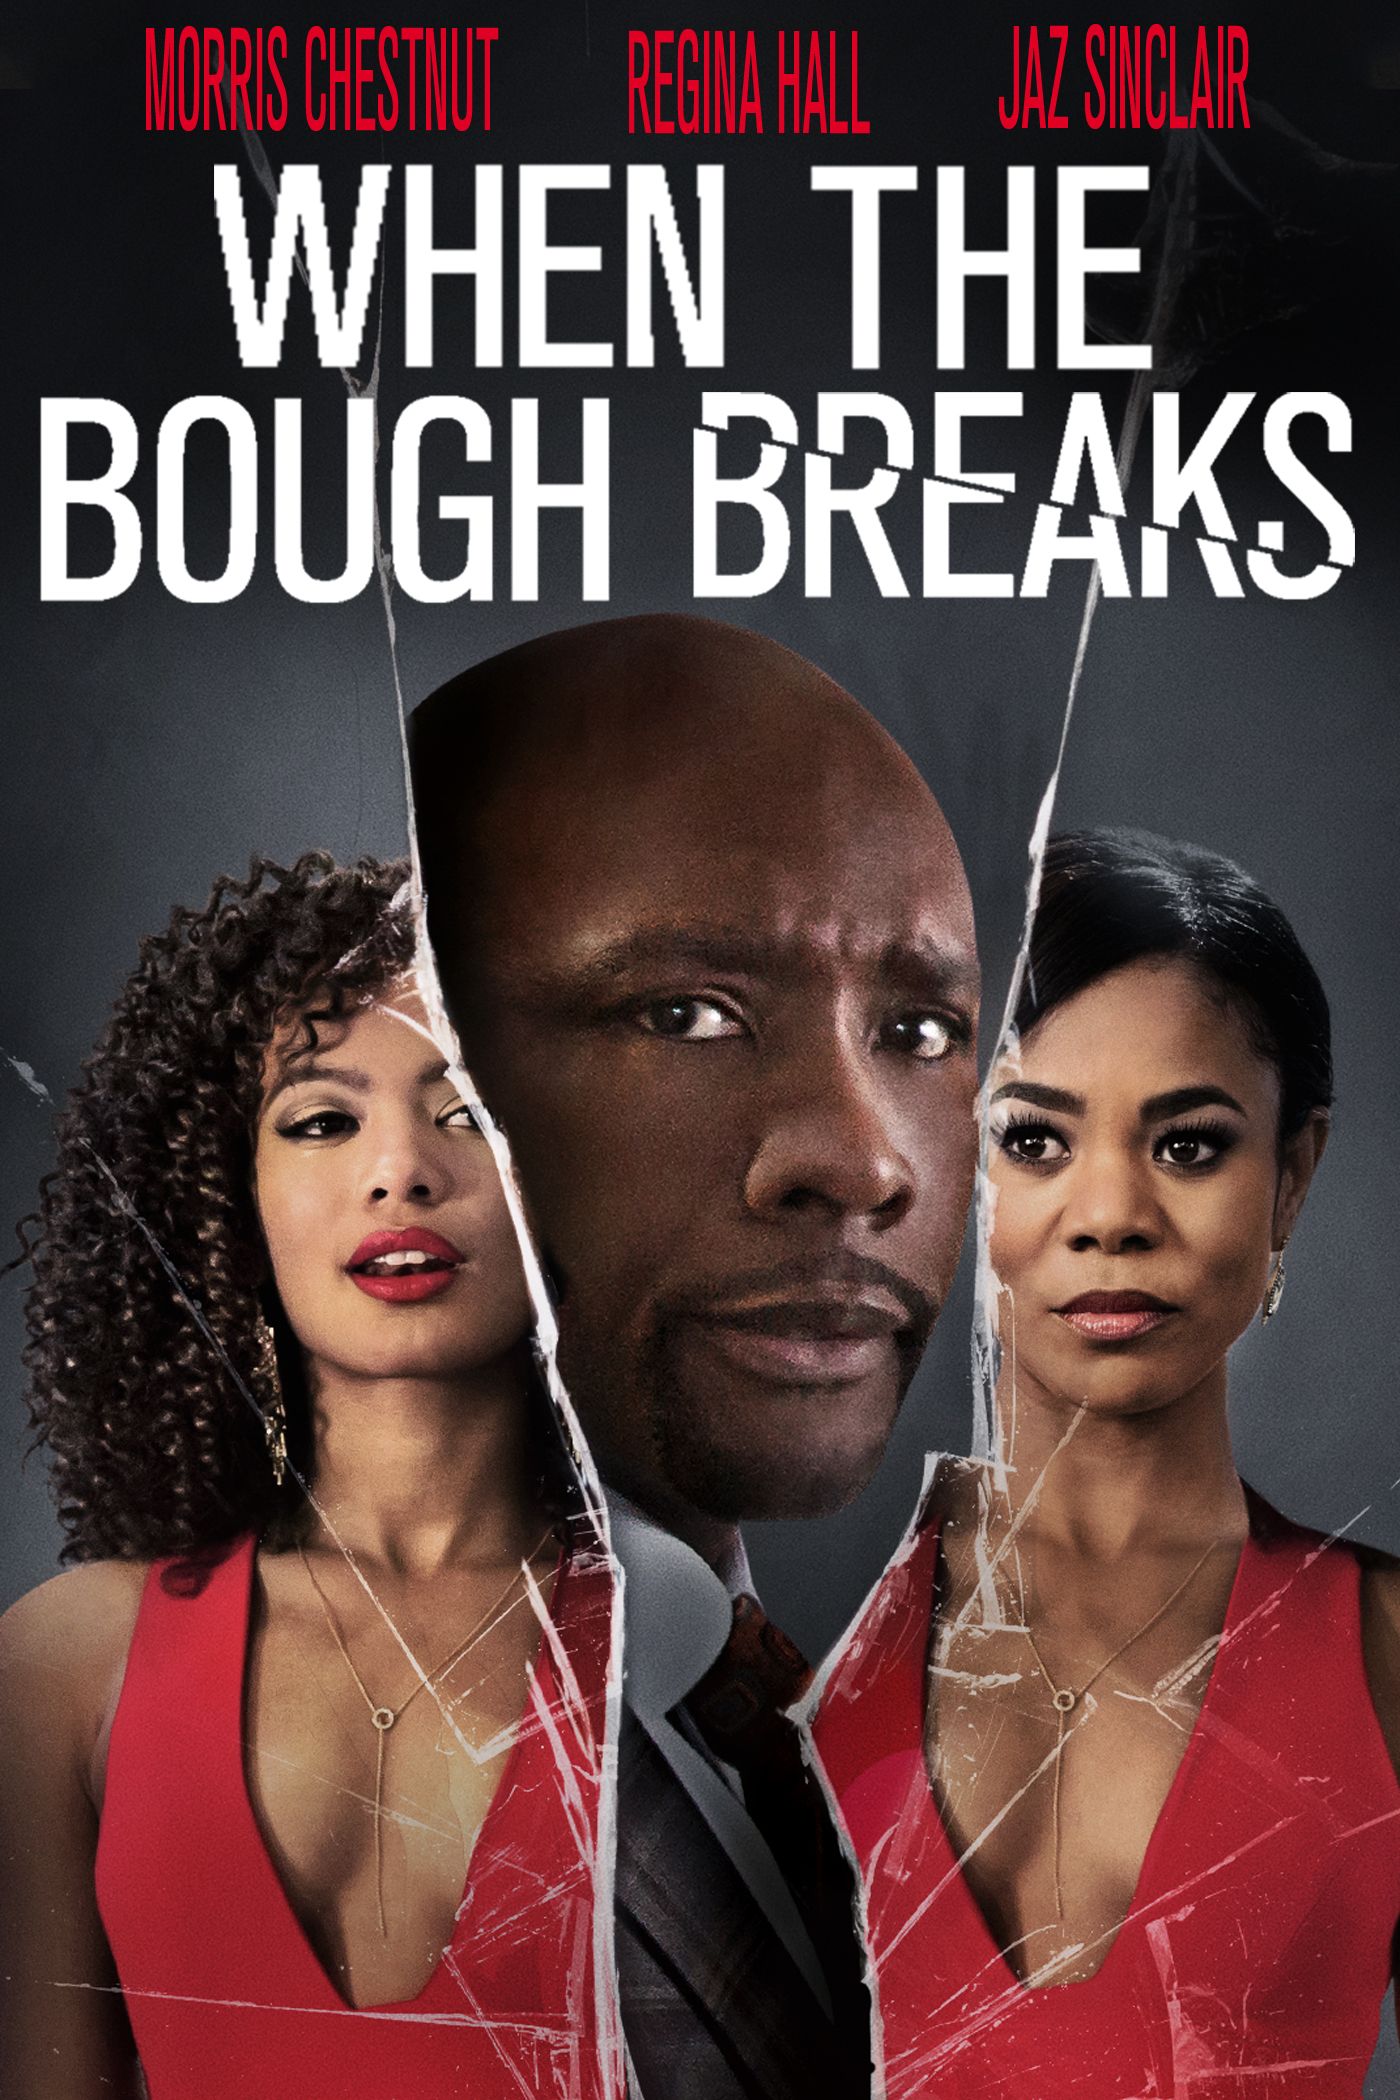 youtube free onmline movie when the bough breaks